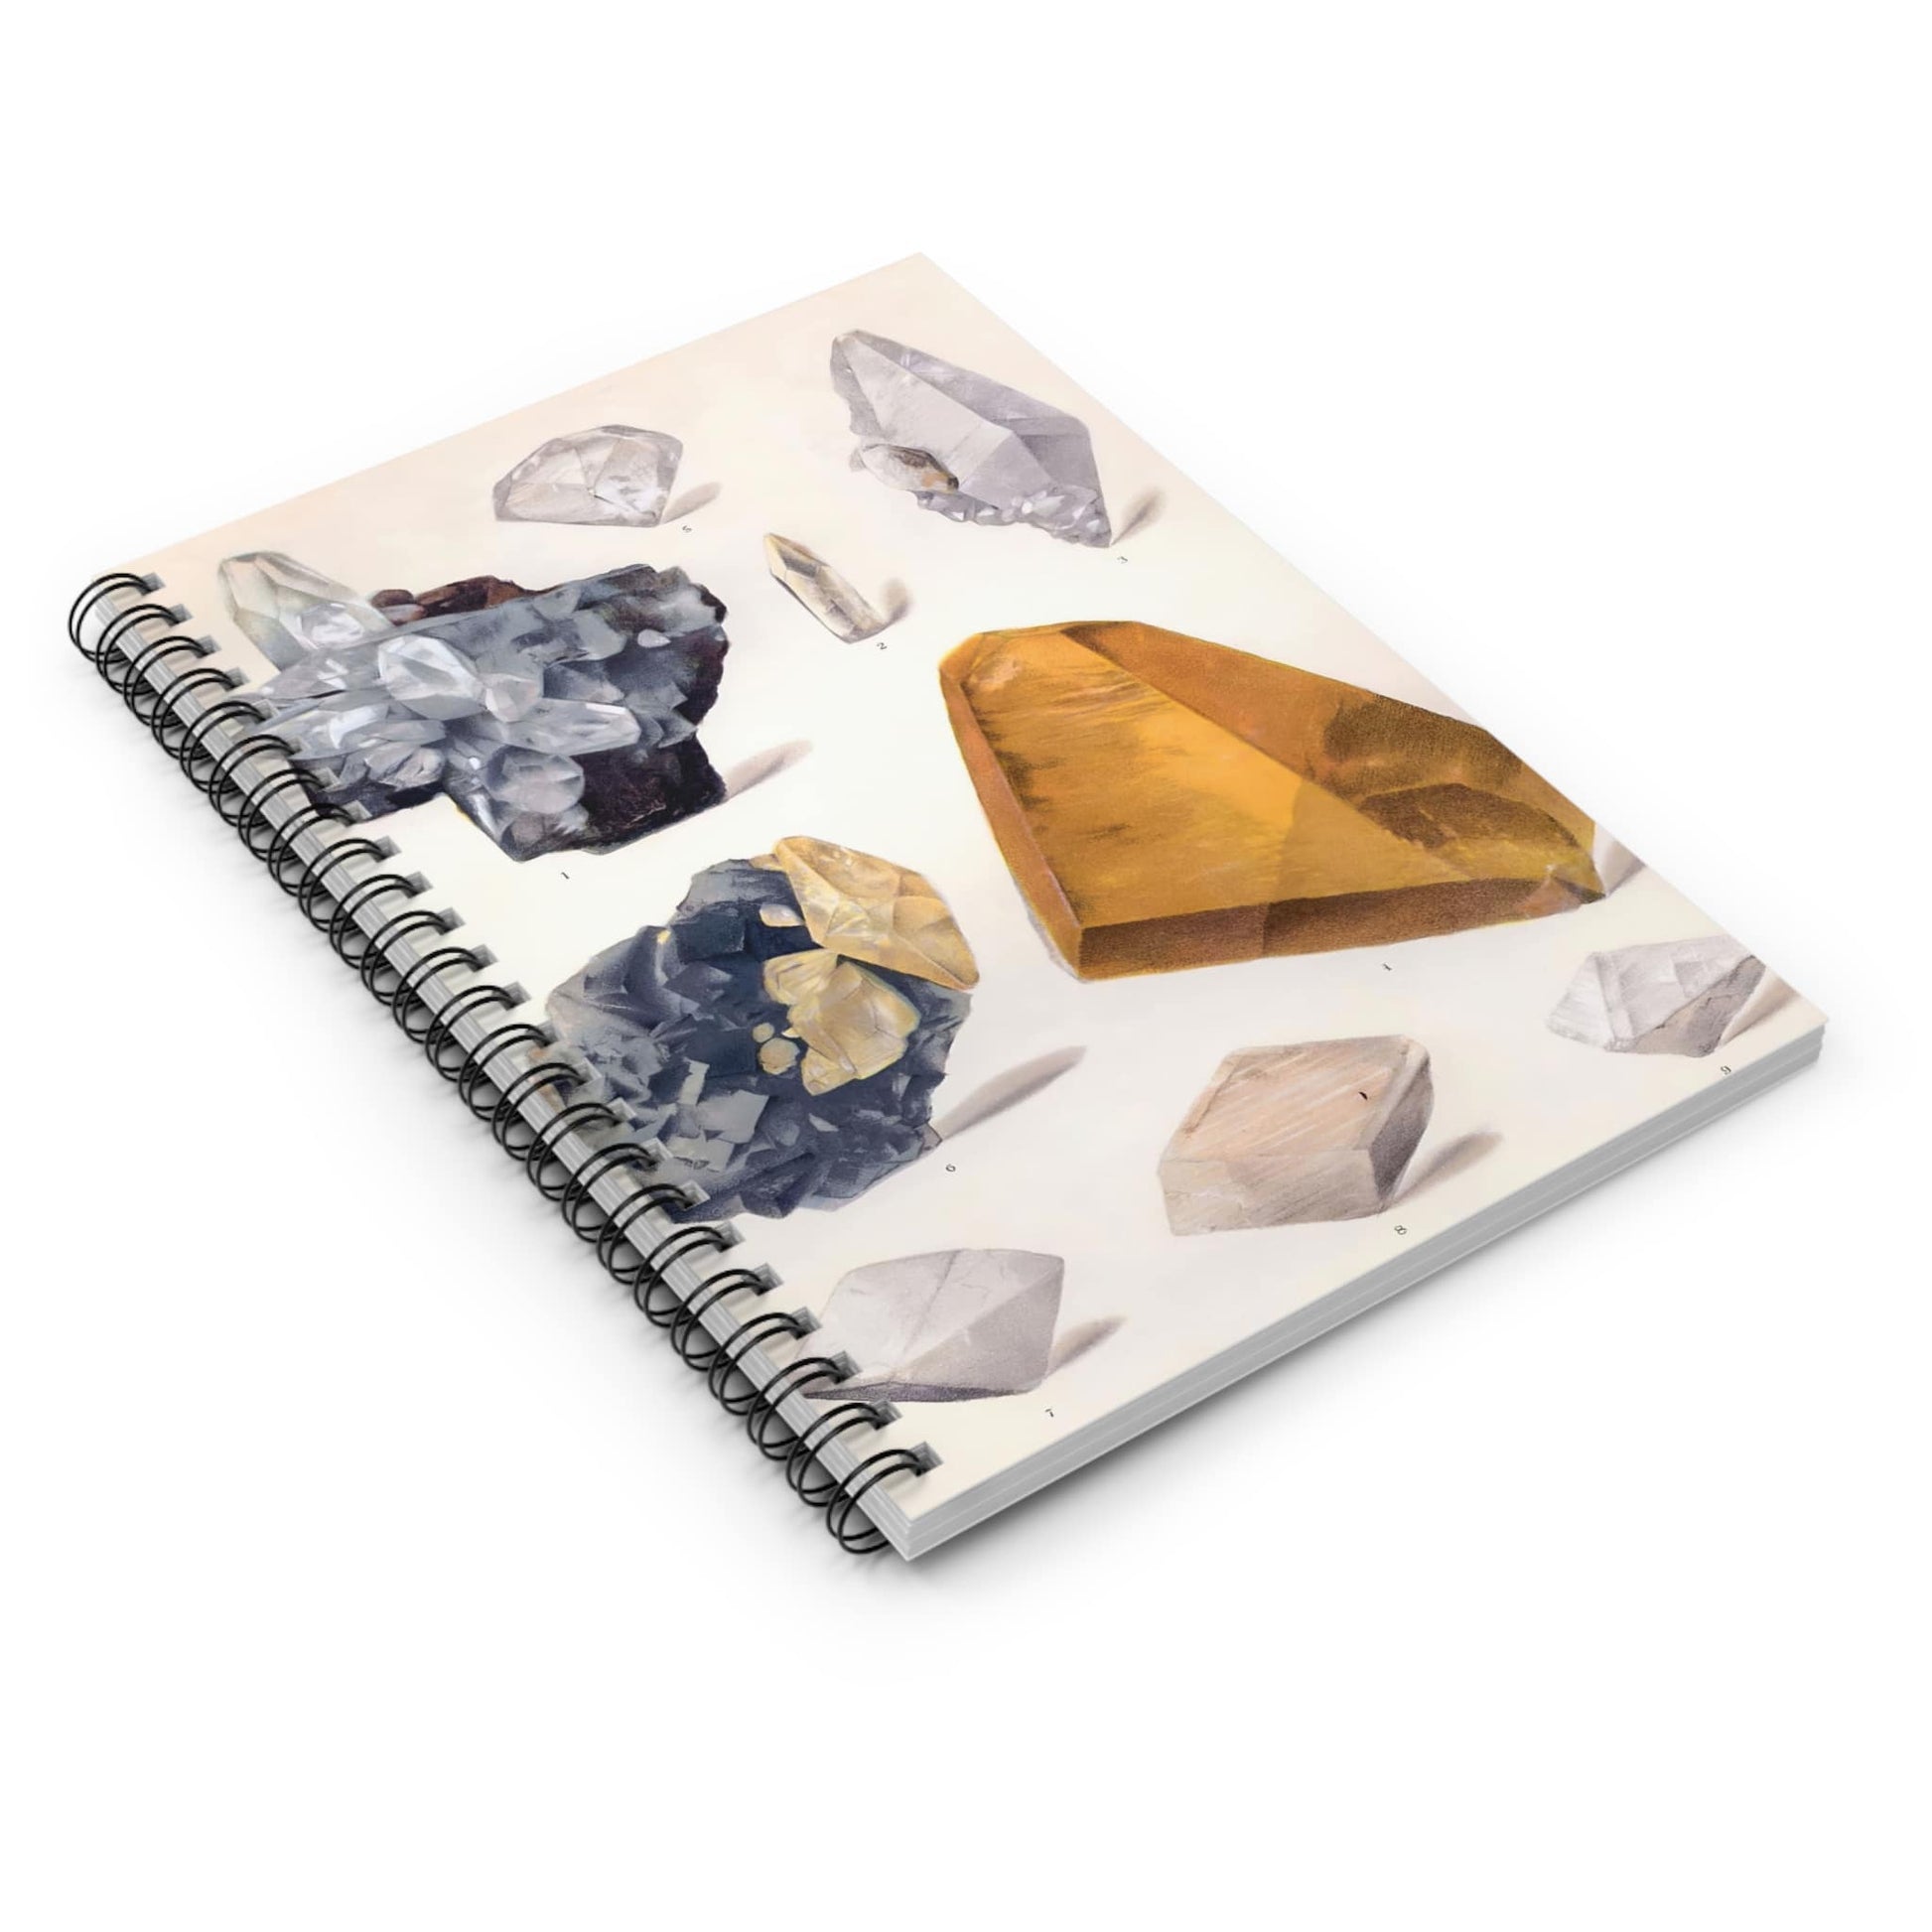 Crystals Spiral Notebook Laying Flat on White Surface